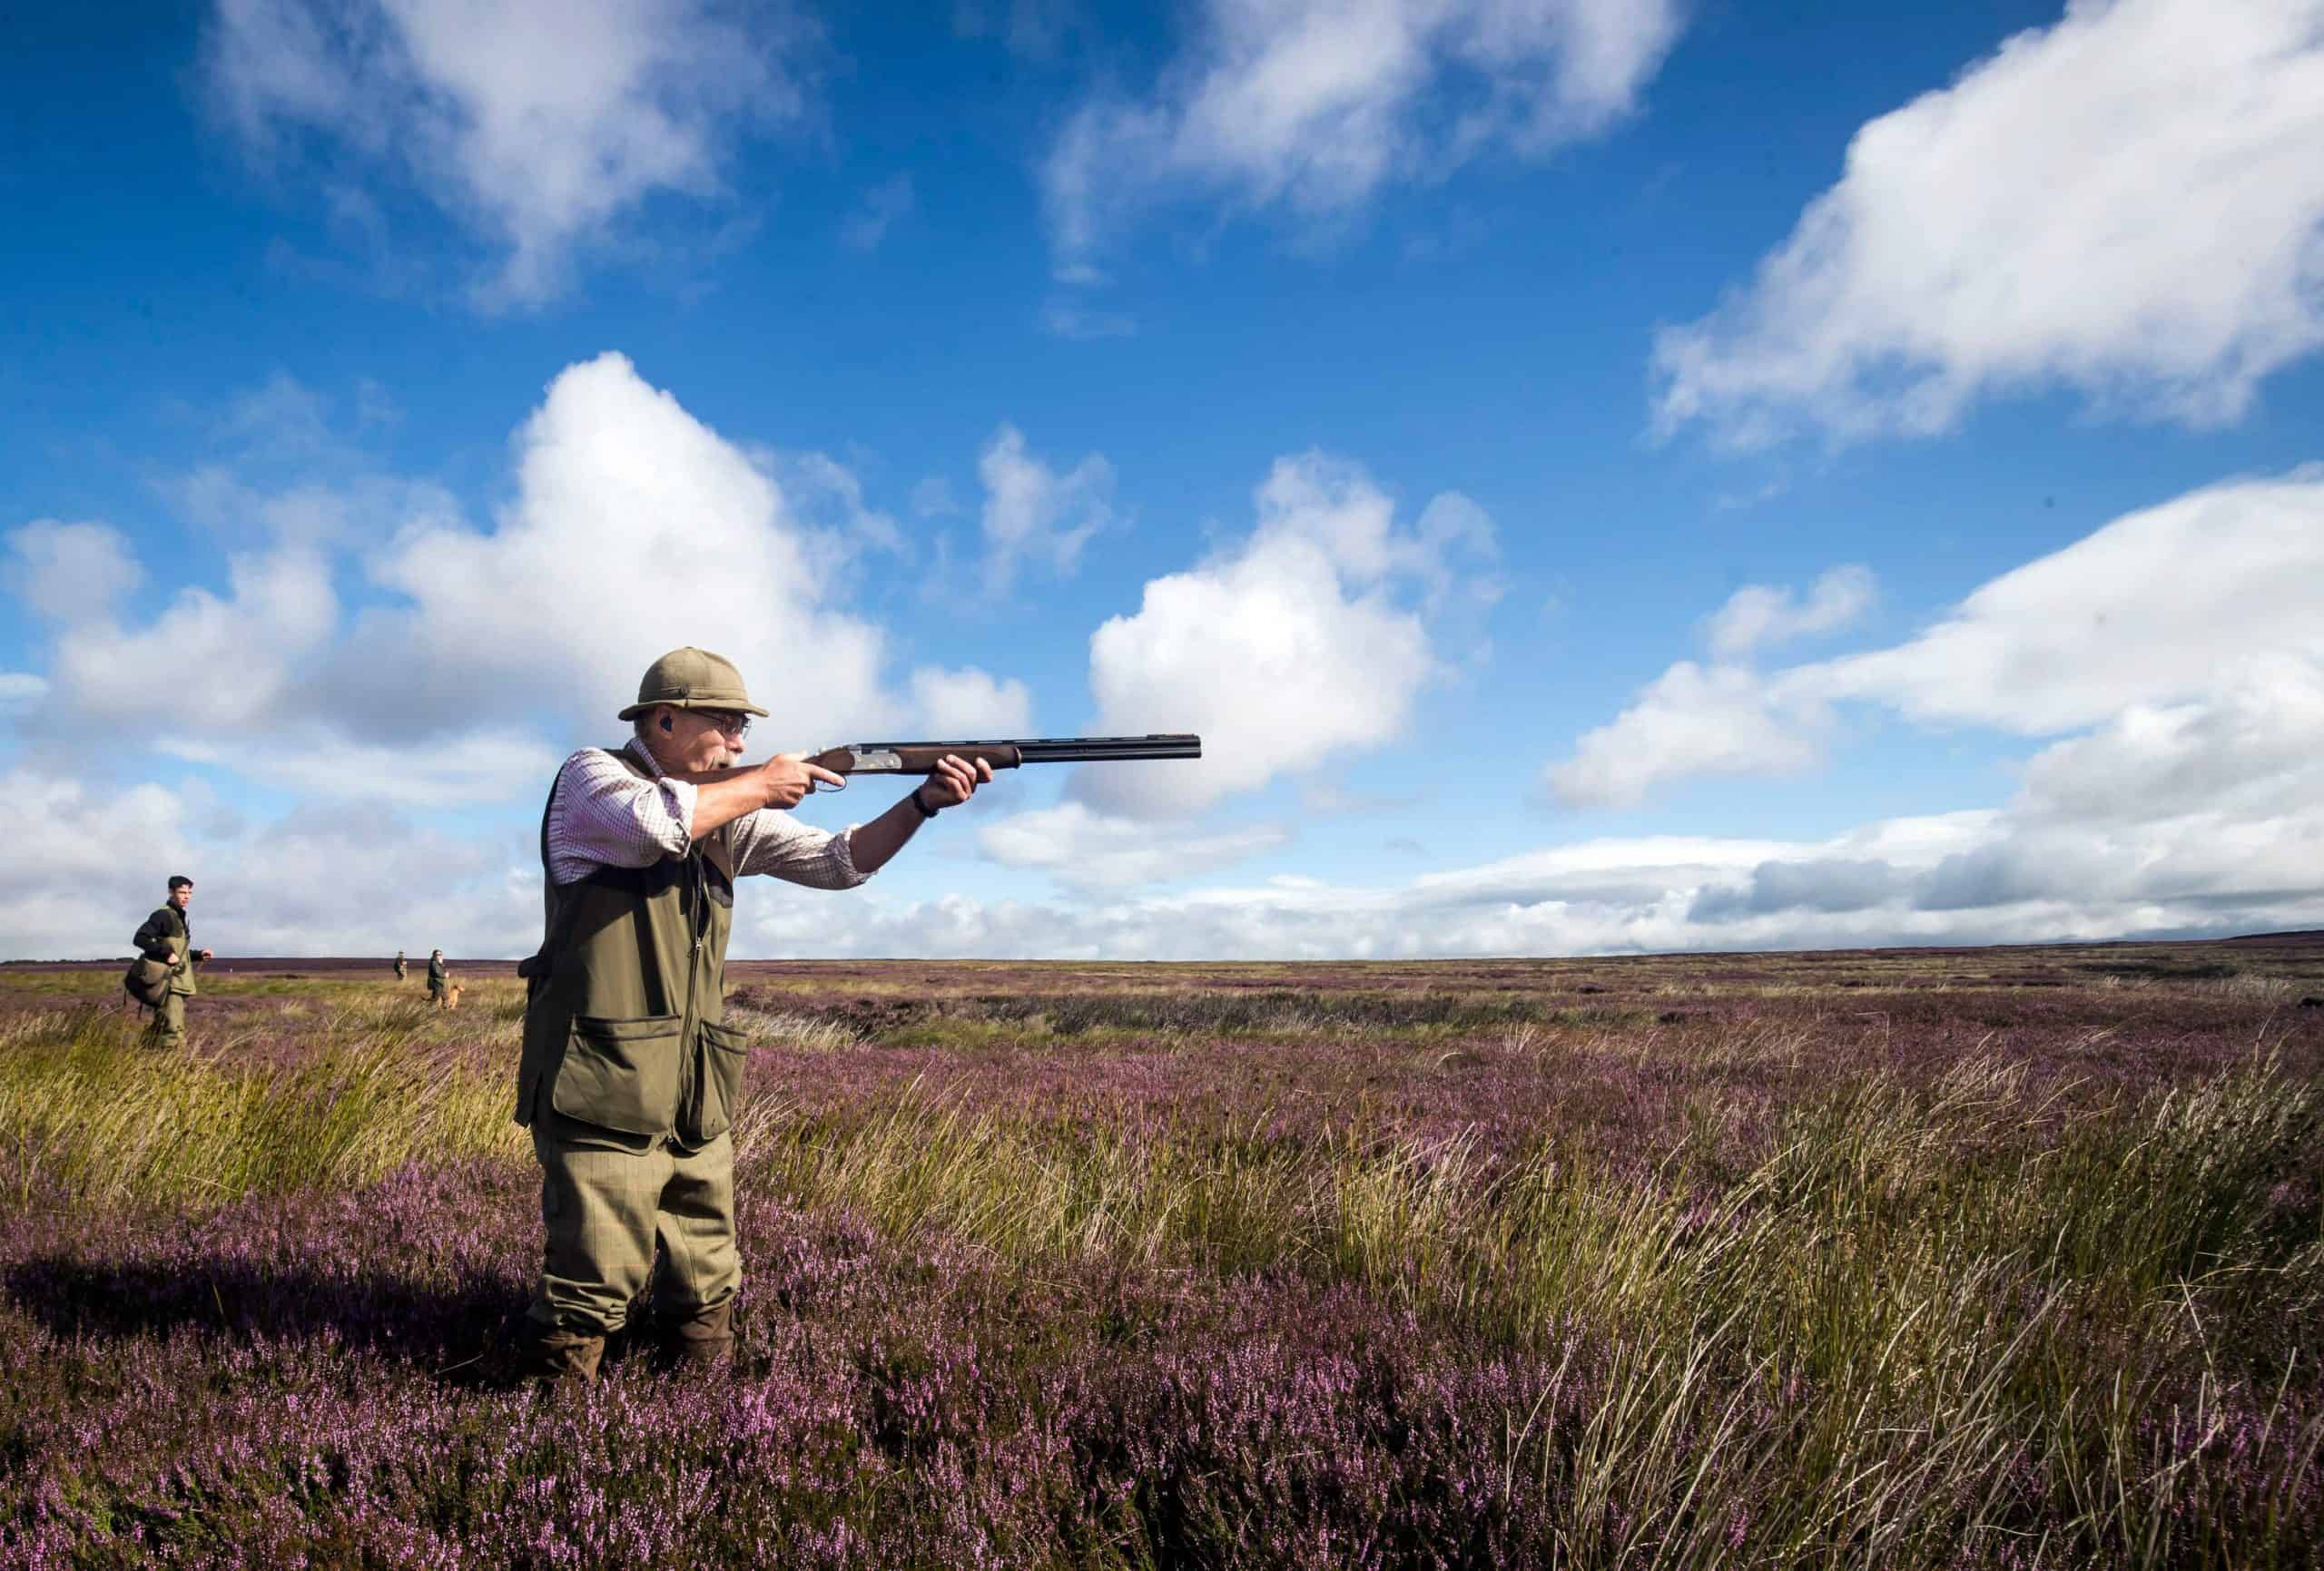 Bemusement as Times reports Grouse Shooting ‘brings different classes together’